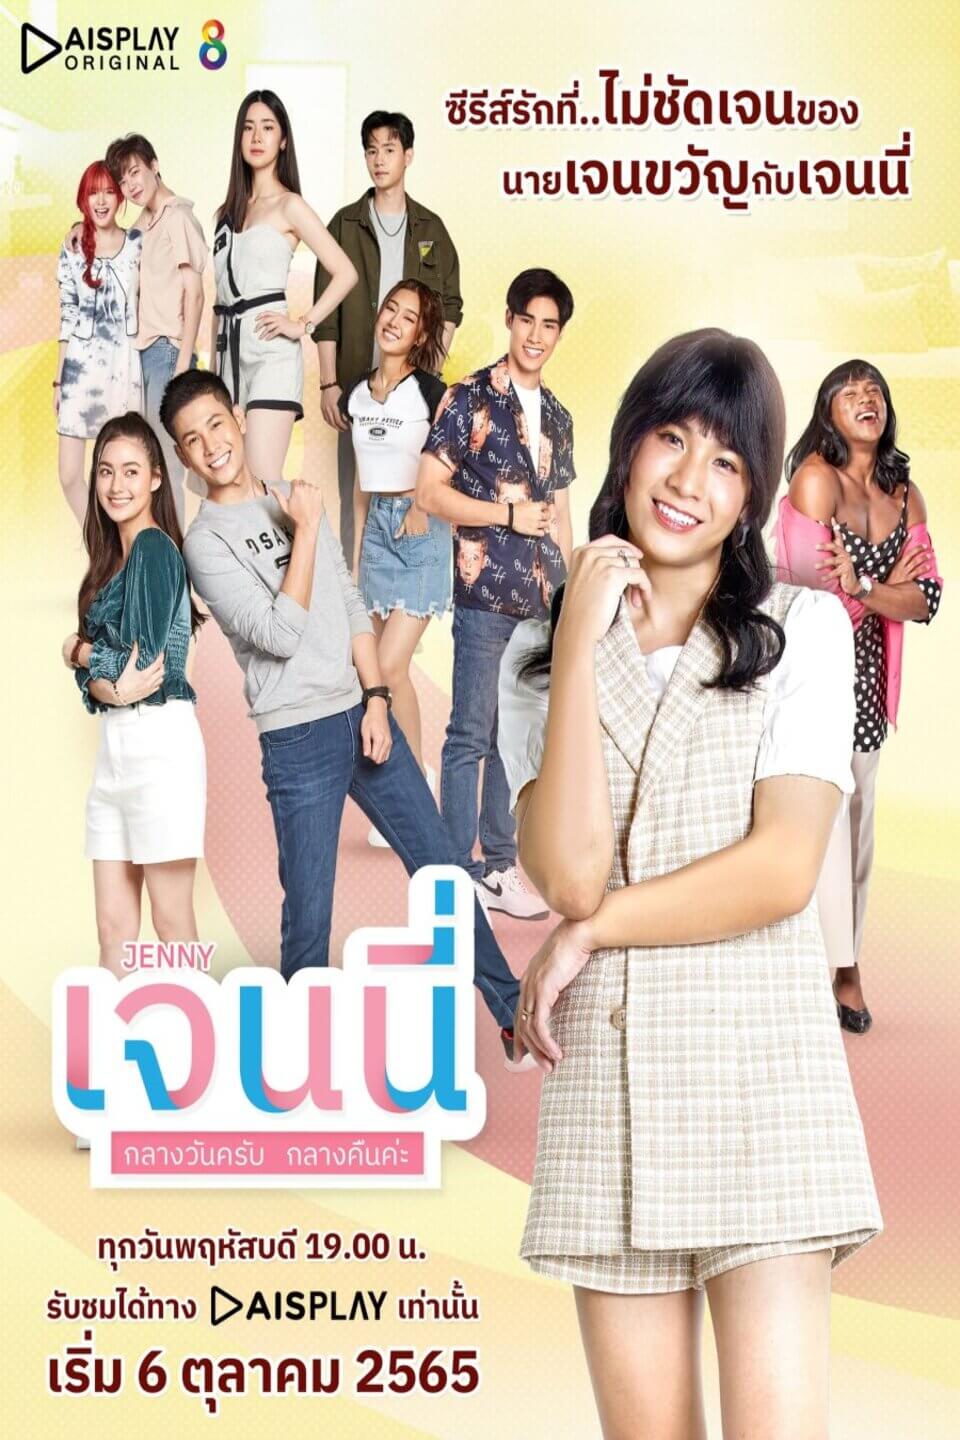 TV ratings for Jenny A.M/P.M (เจนนี่ กลางวันครับ กลางคืนค่ะ) in the United Kingdom. Channel 8 TV series